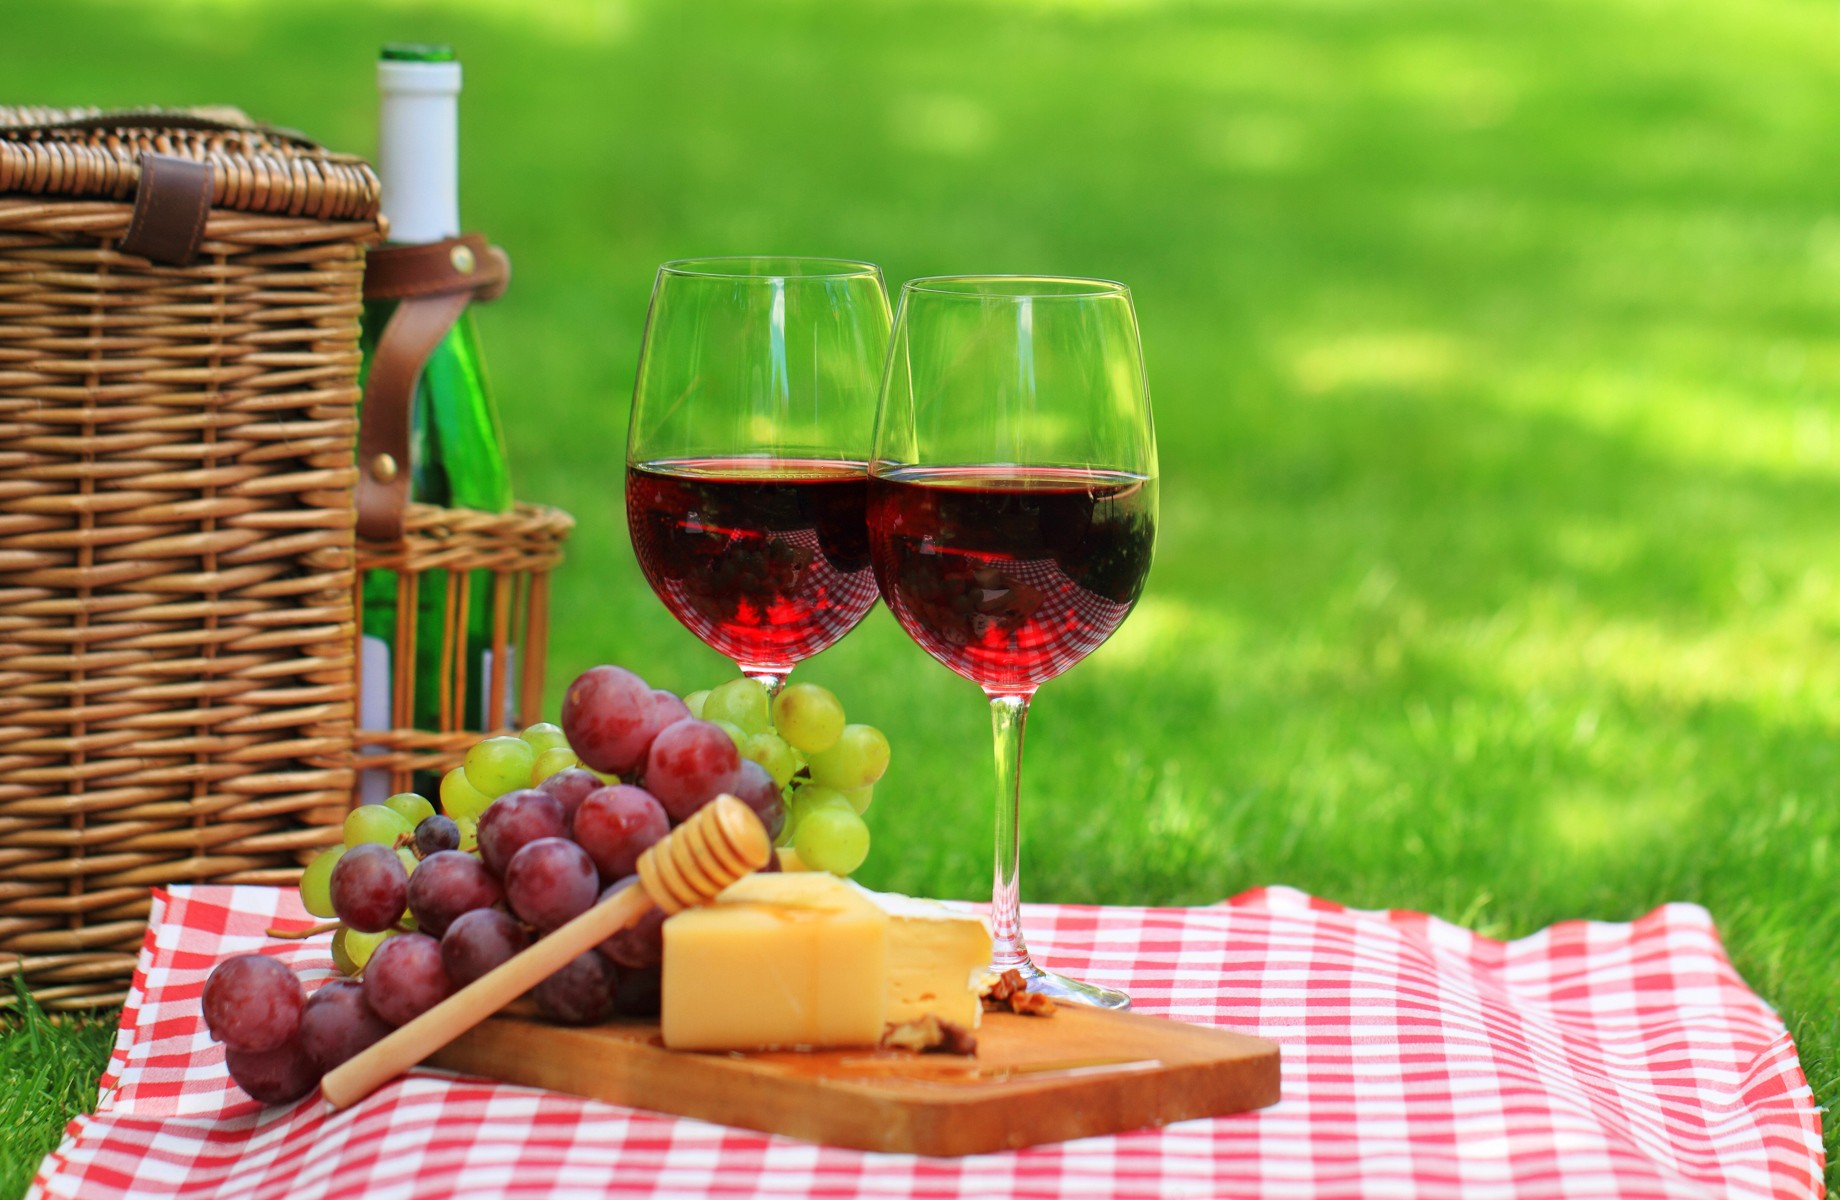 Picnic in the Vineyard: a good experience!